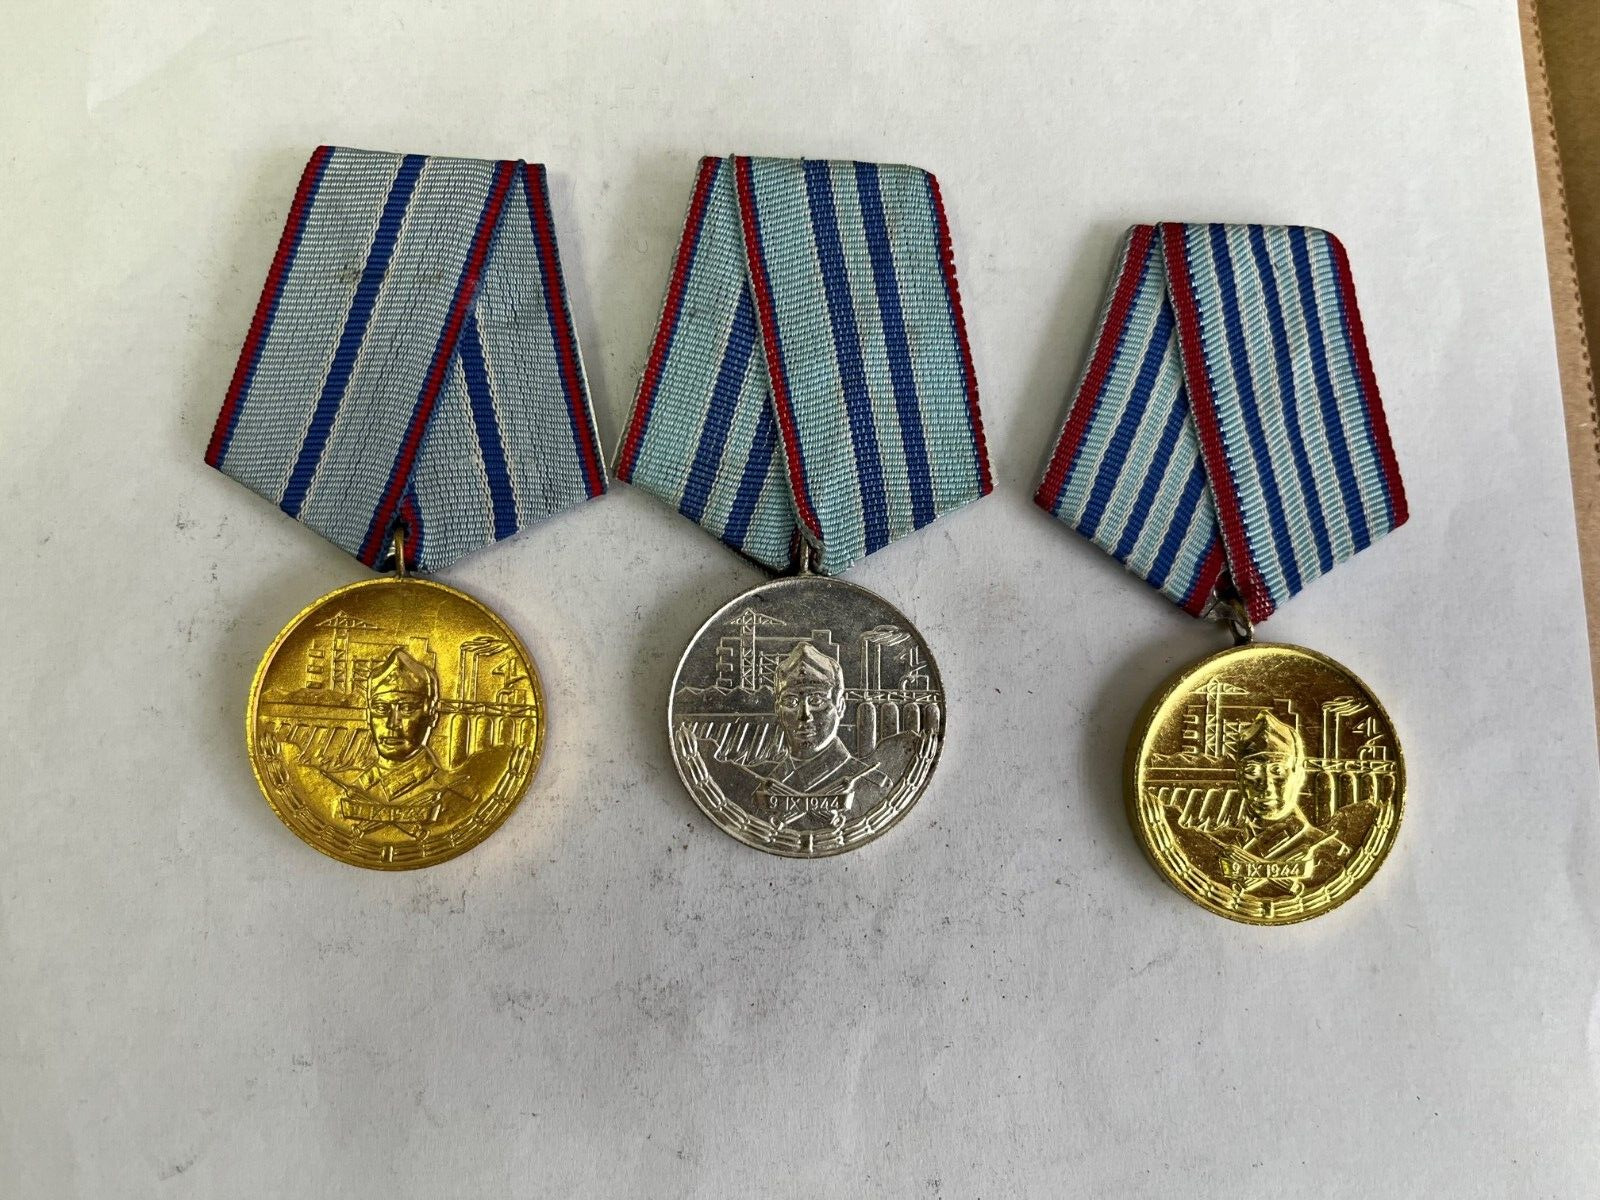 BULGARIA COMMUNIST 3 MEDALS 10,15, 20 YEARS SERVICE IN MILITARY BUILDING TROOPS